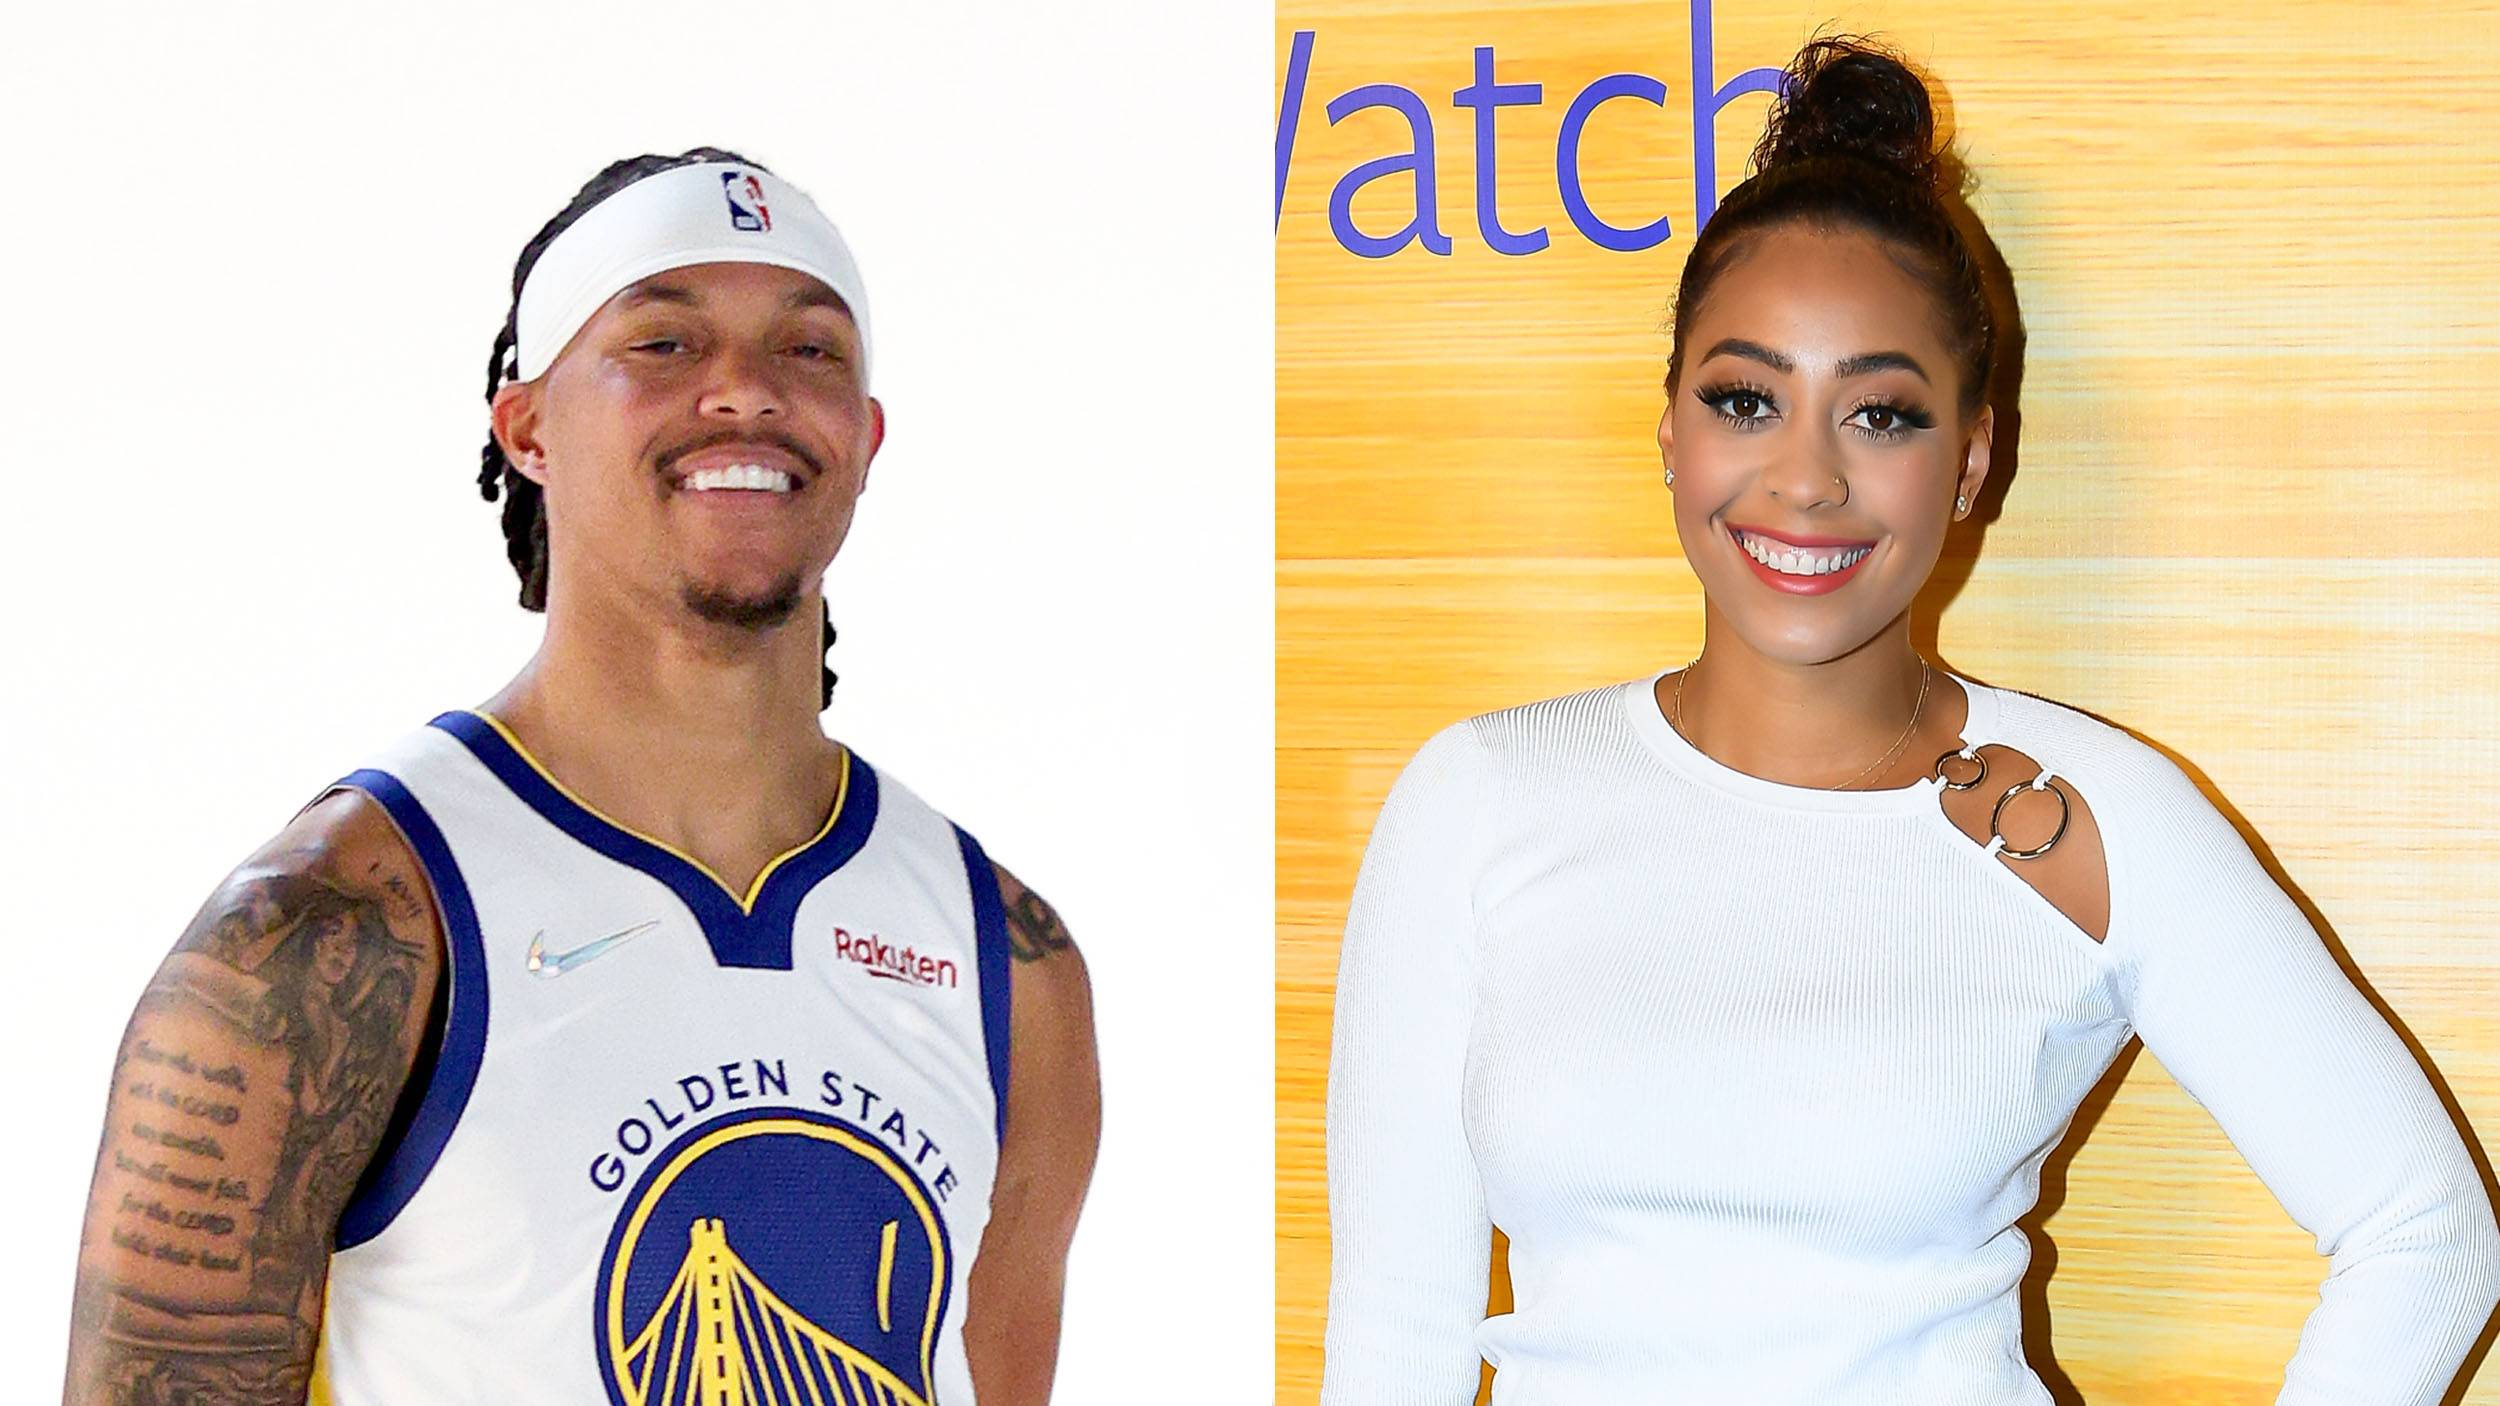 Adorable baby 'Stuff Curry' looks just like Steph Curry